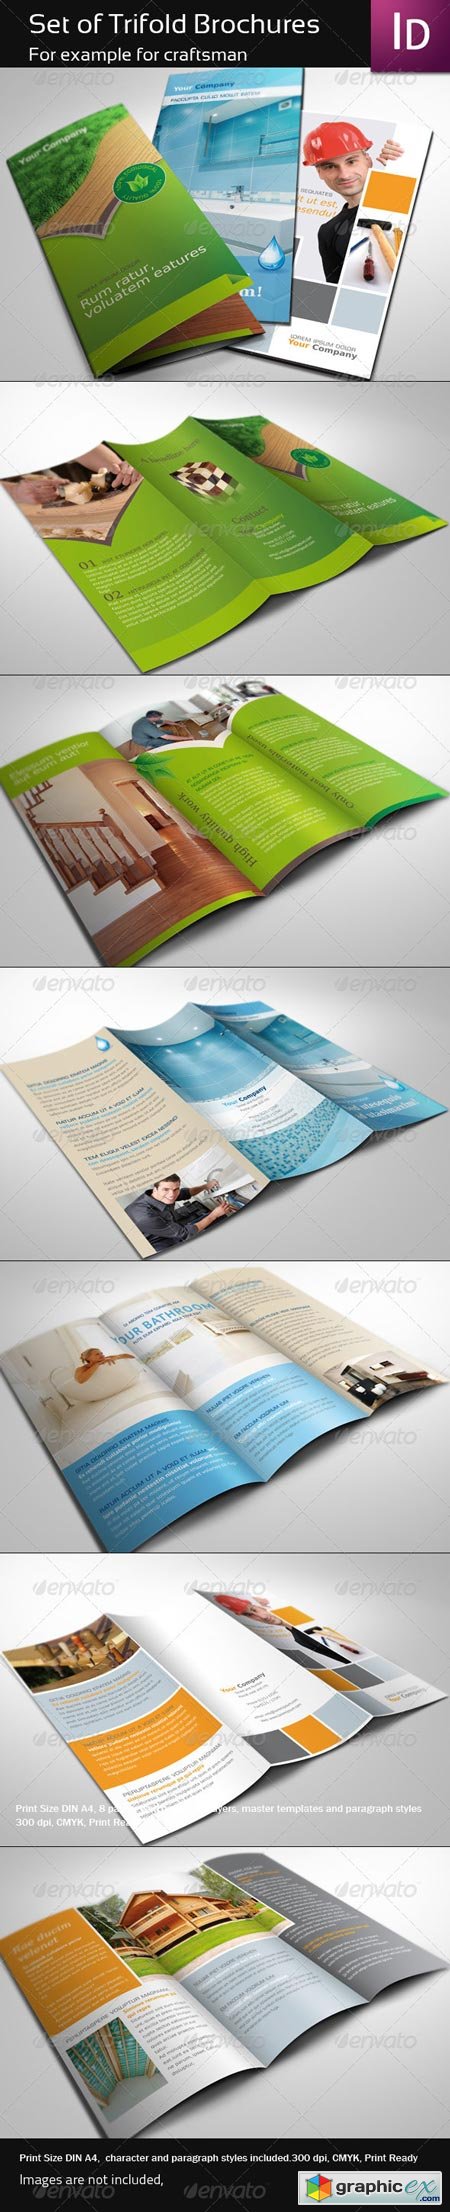 Set of Trifold Brochure 337187